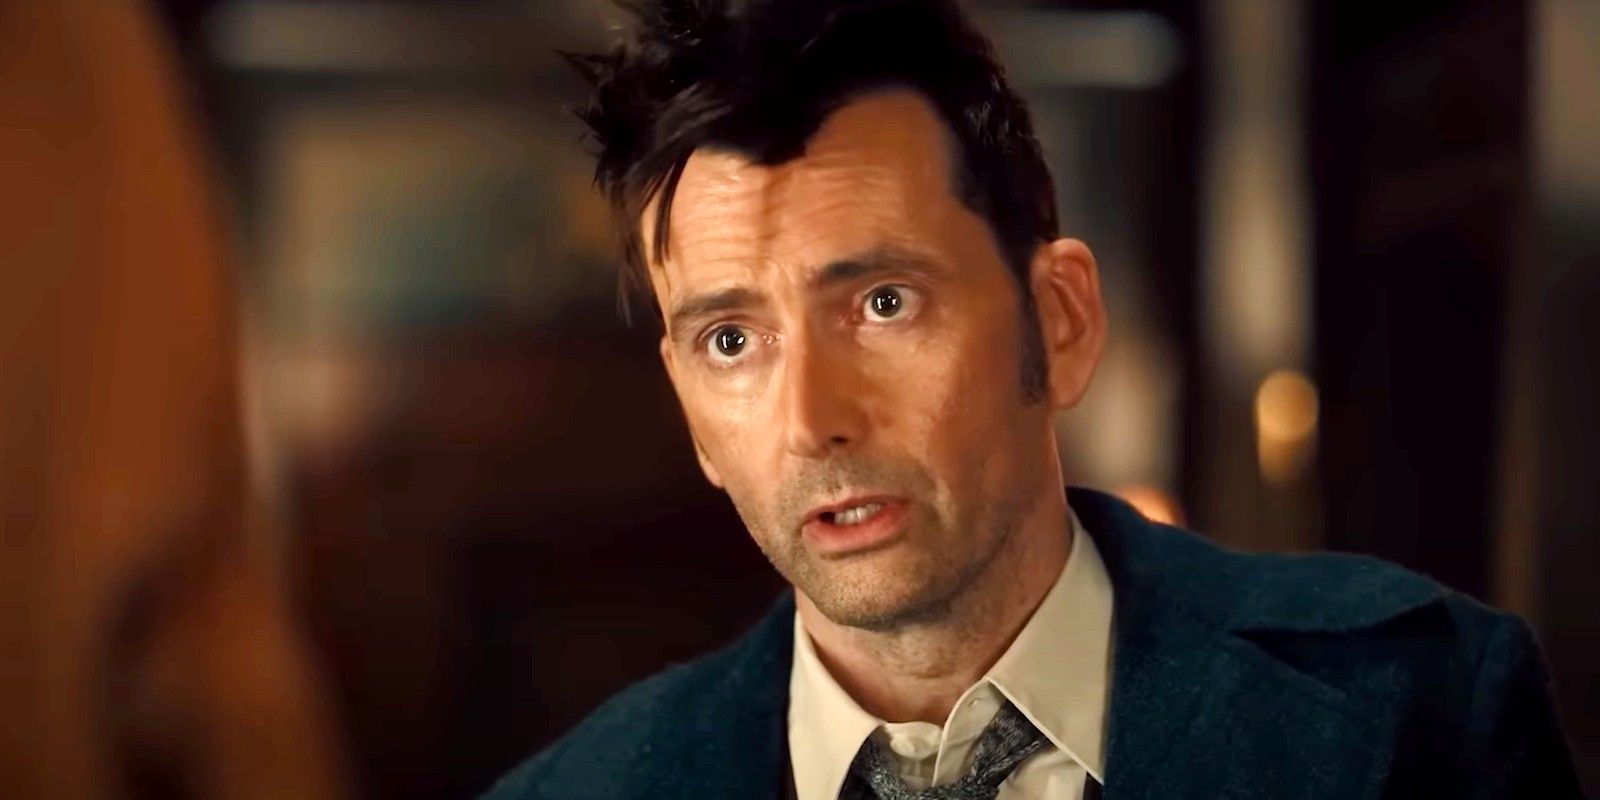 David Tennant addresses whether he would return to Doctor Who again